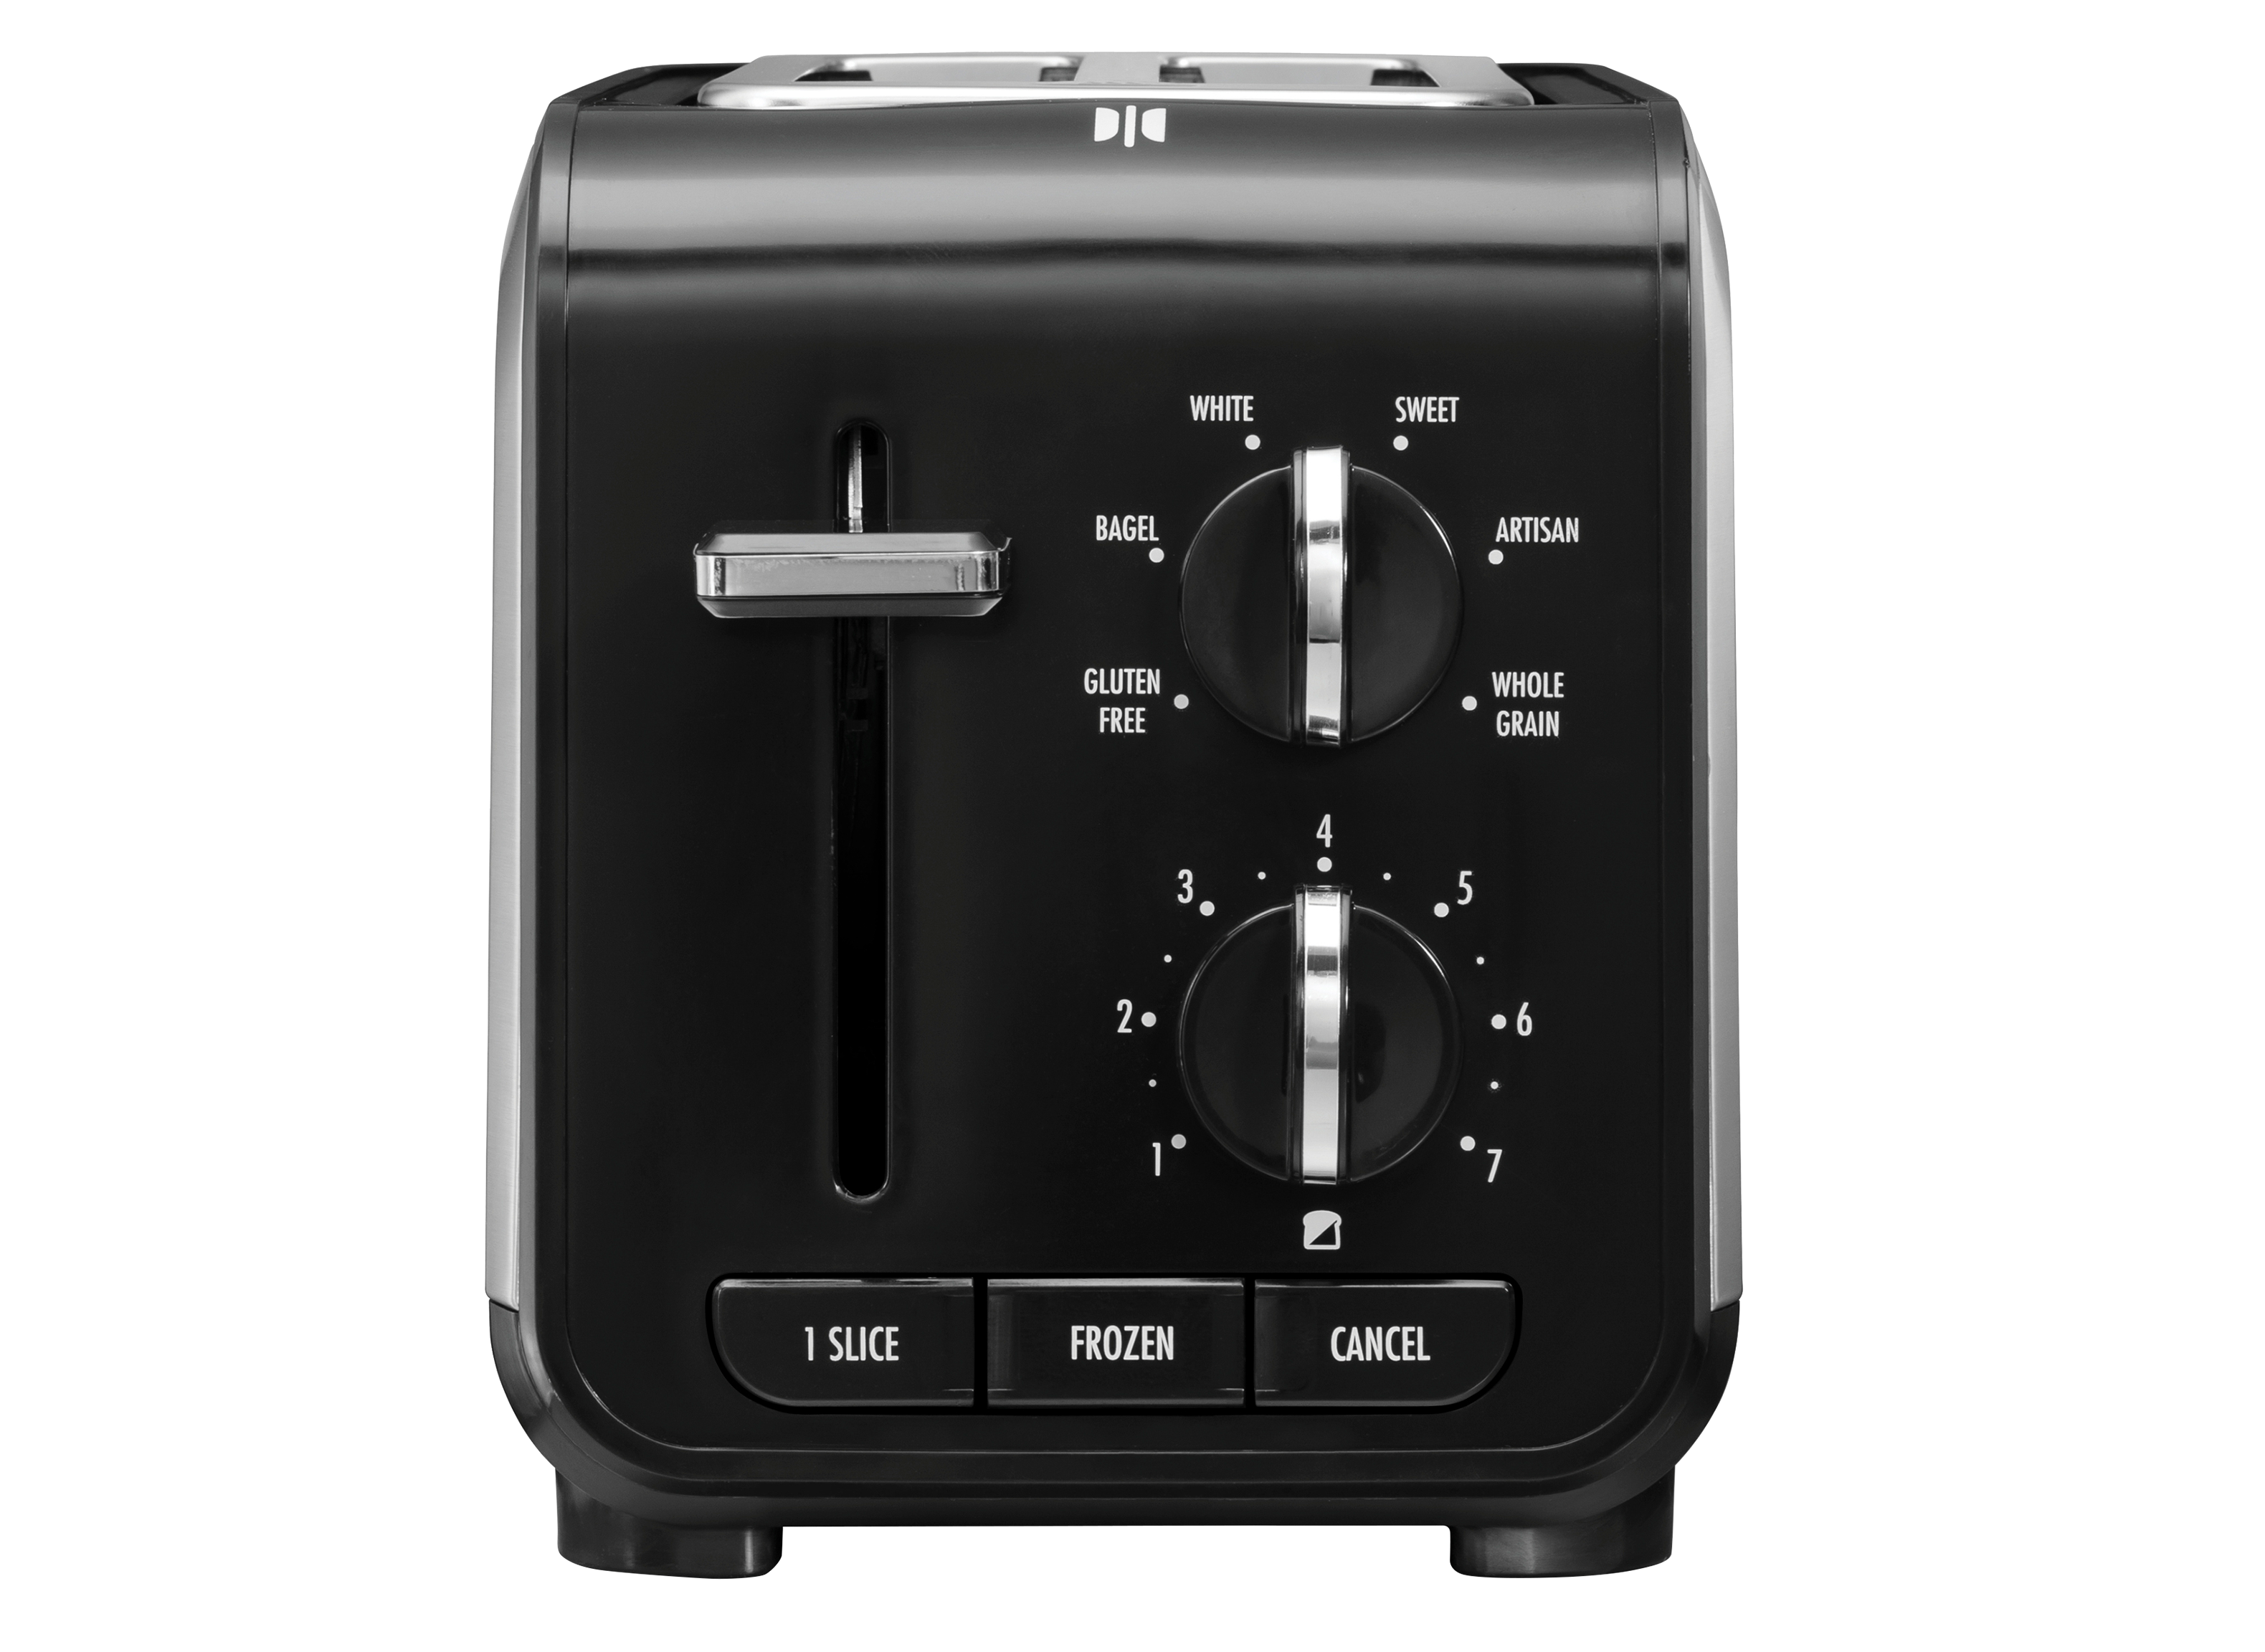 https://crdms.images.consumerreports.org/prod/products/cr/models/403716-2-slice-toasters-hamilton-beach-expert-toast-2-slice-10020084.png